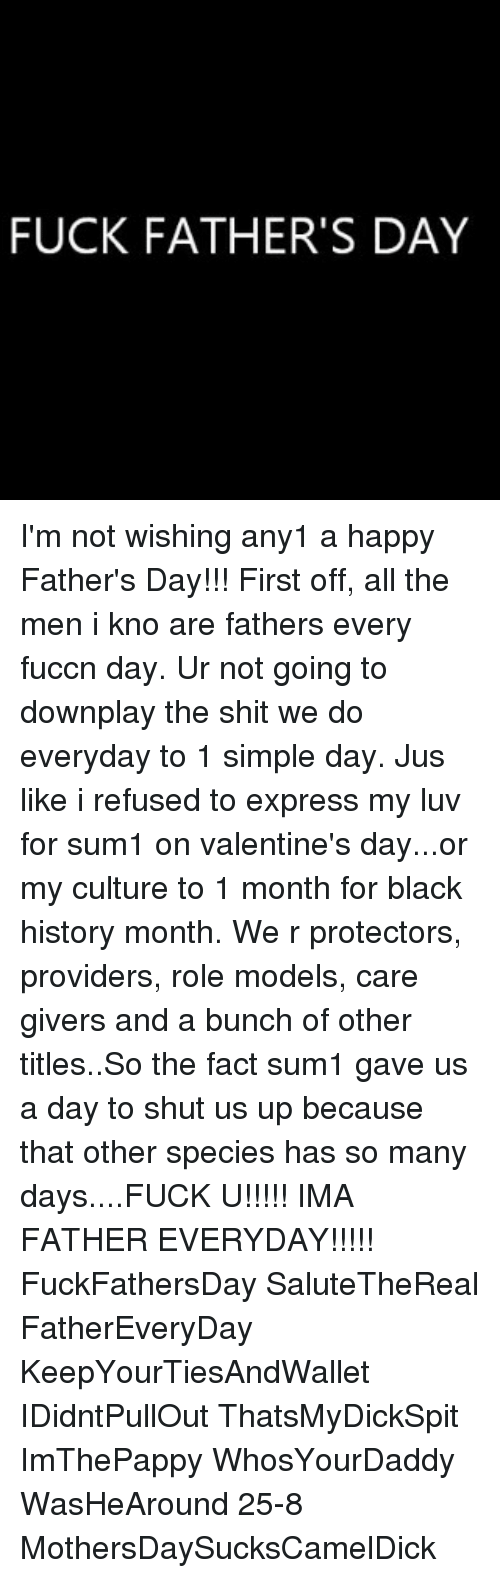 Fathers day fuck